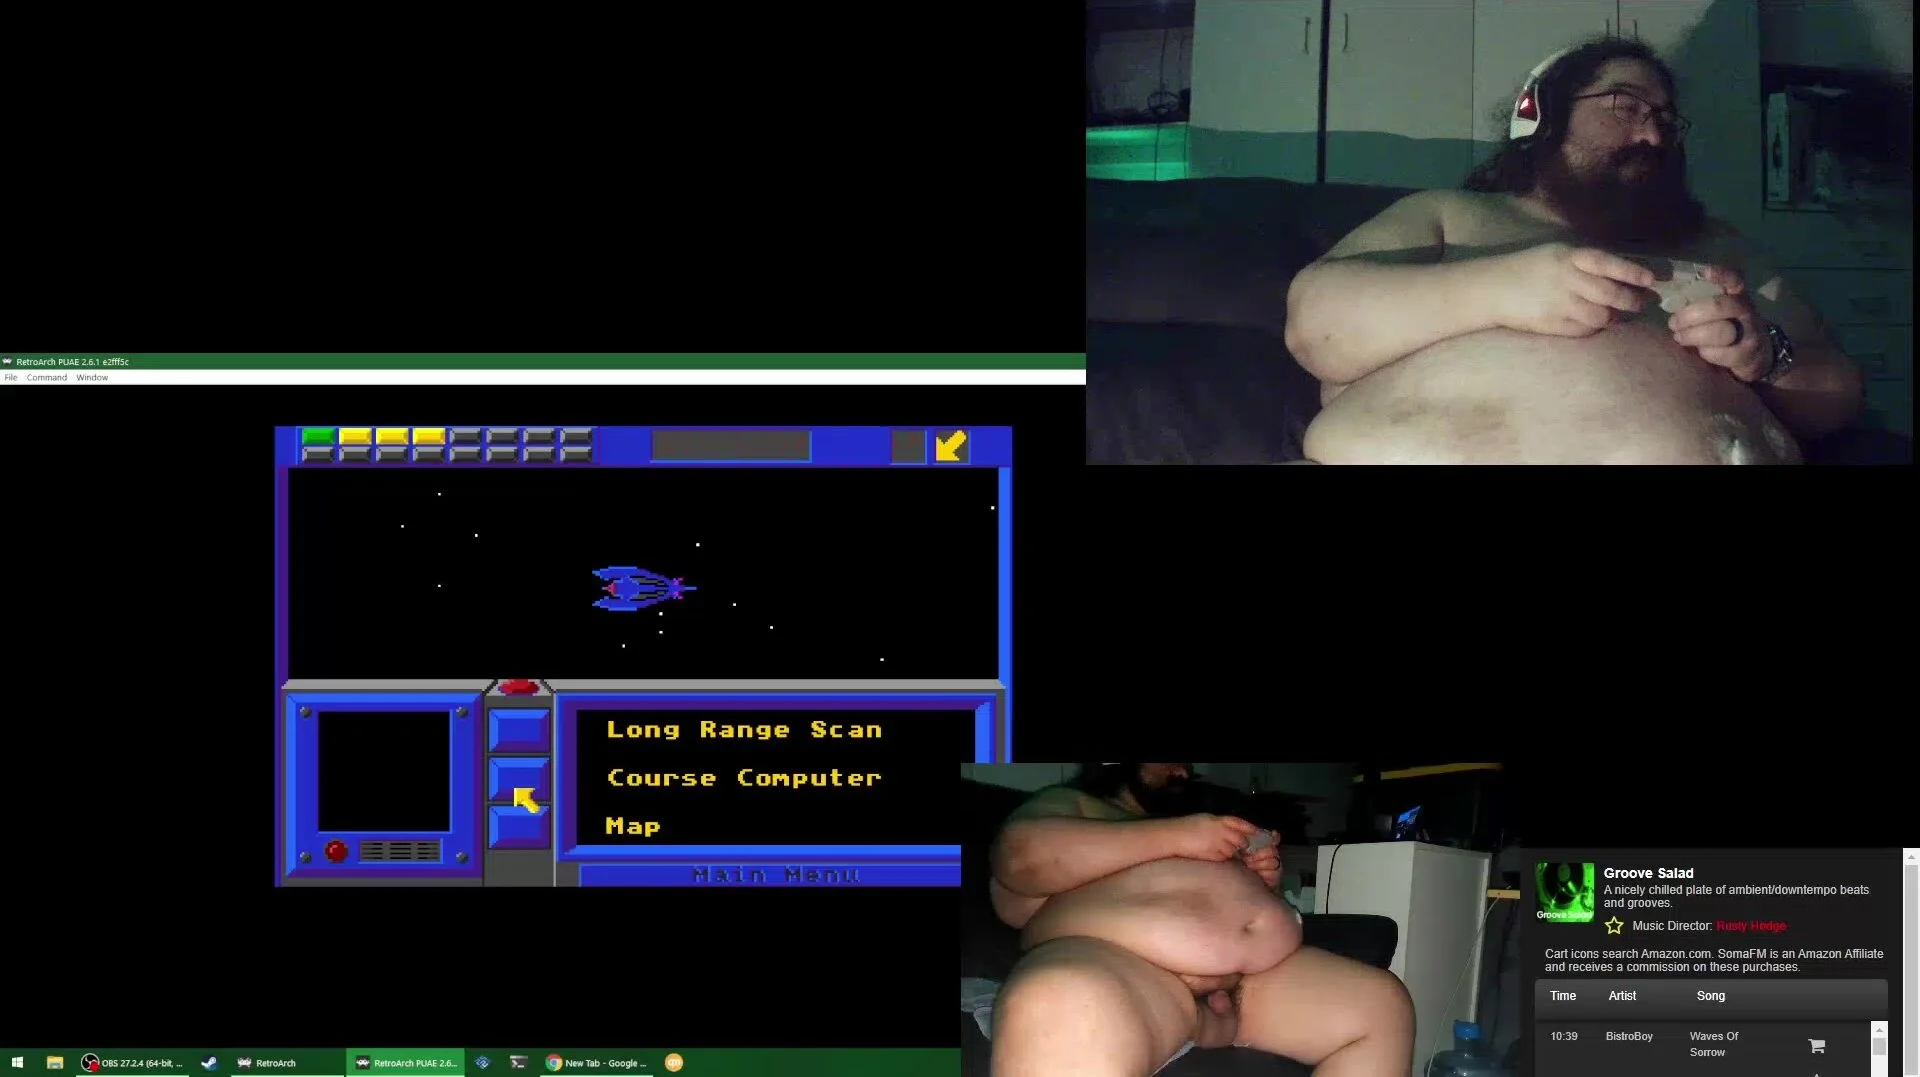 Stoned naked gaming series - Dads Amiga Collection picture